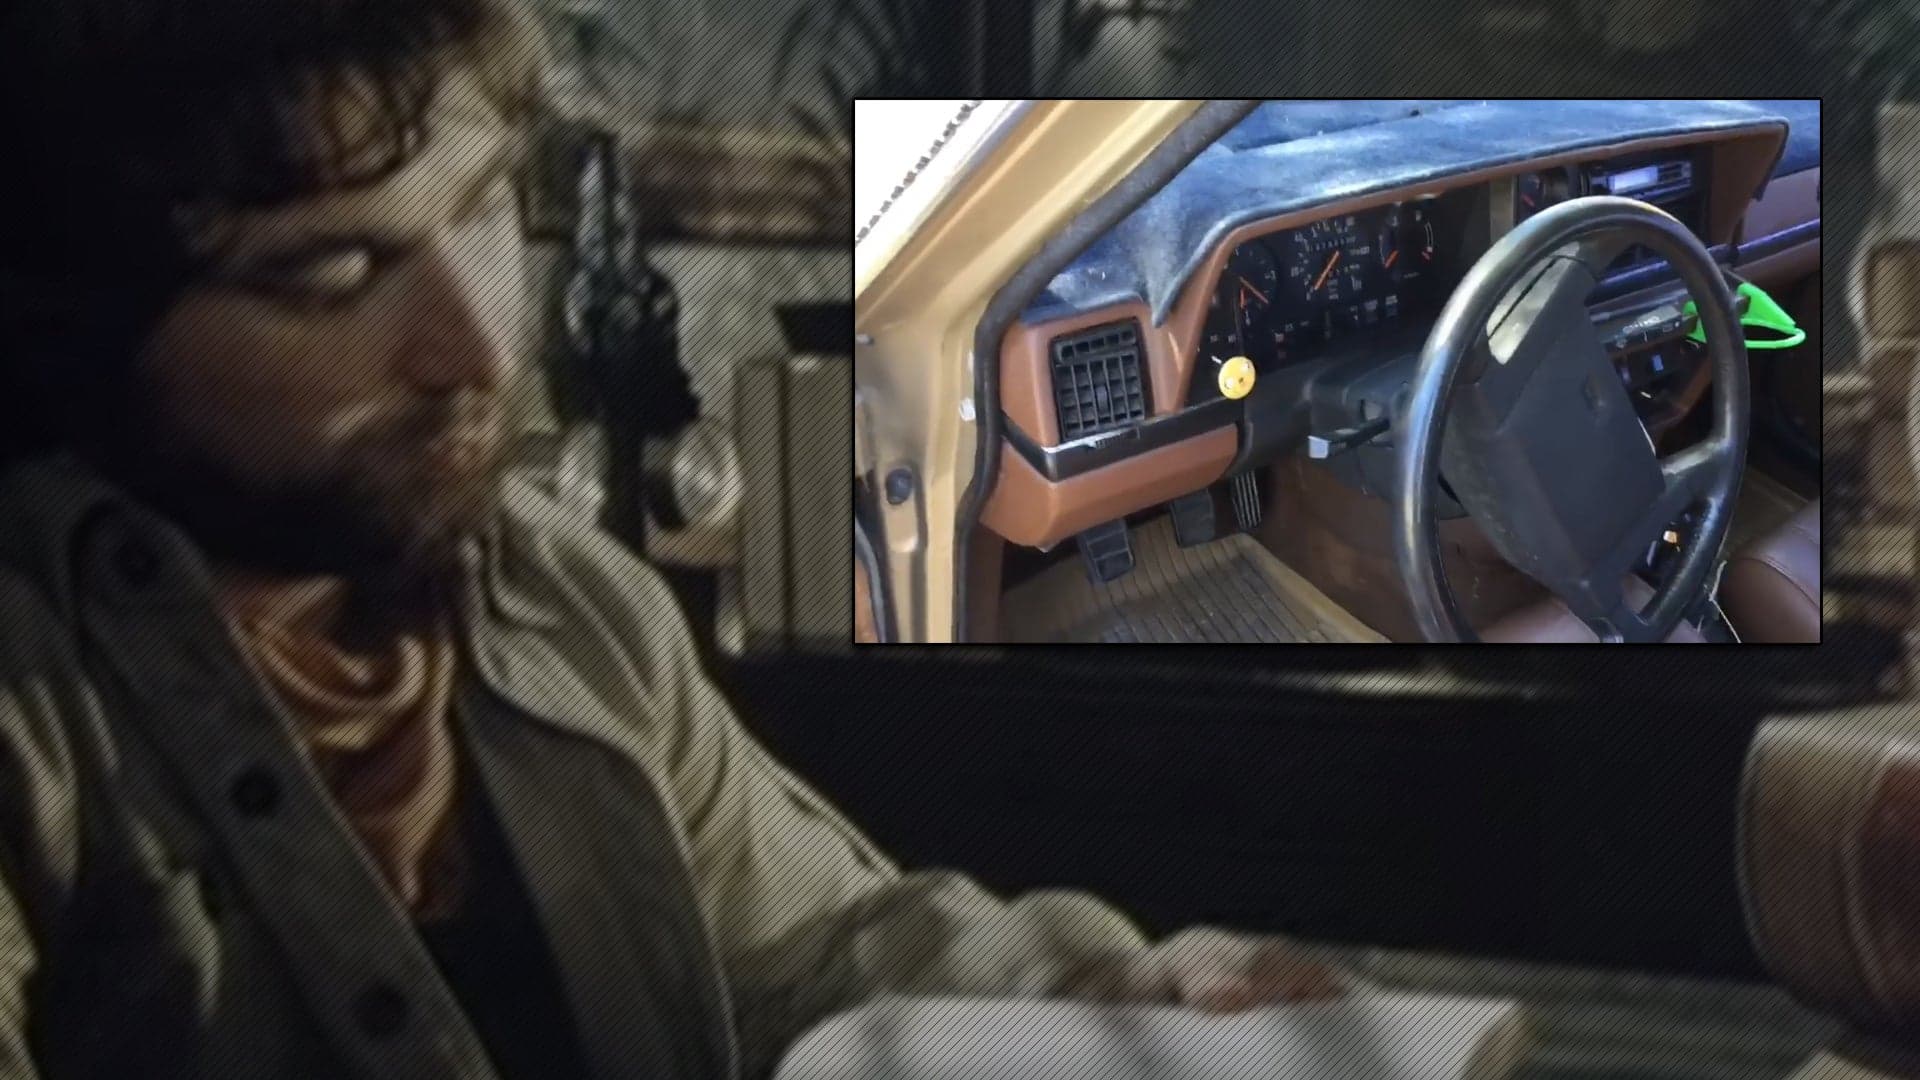 Some Madman Hacked His Volvo 240 Door Chime to Play ‘Africa’ by Toto